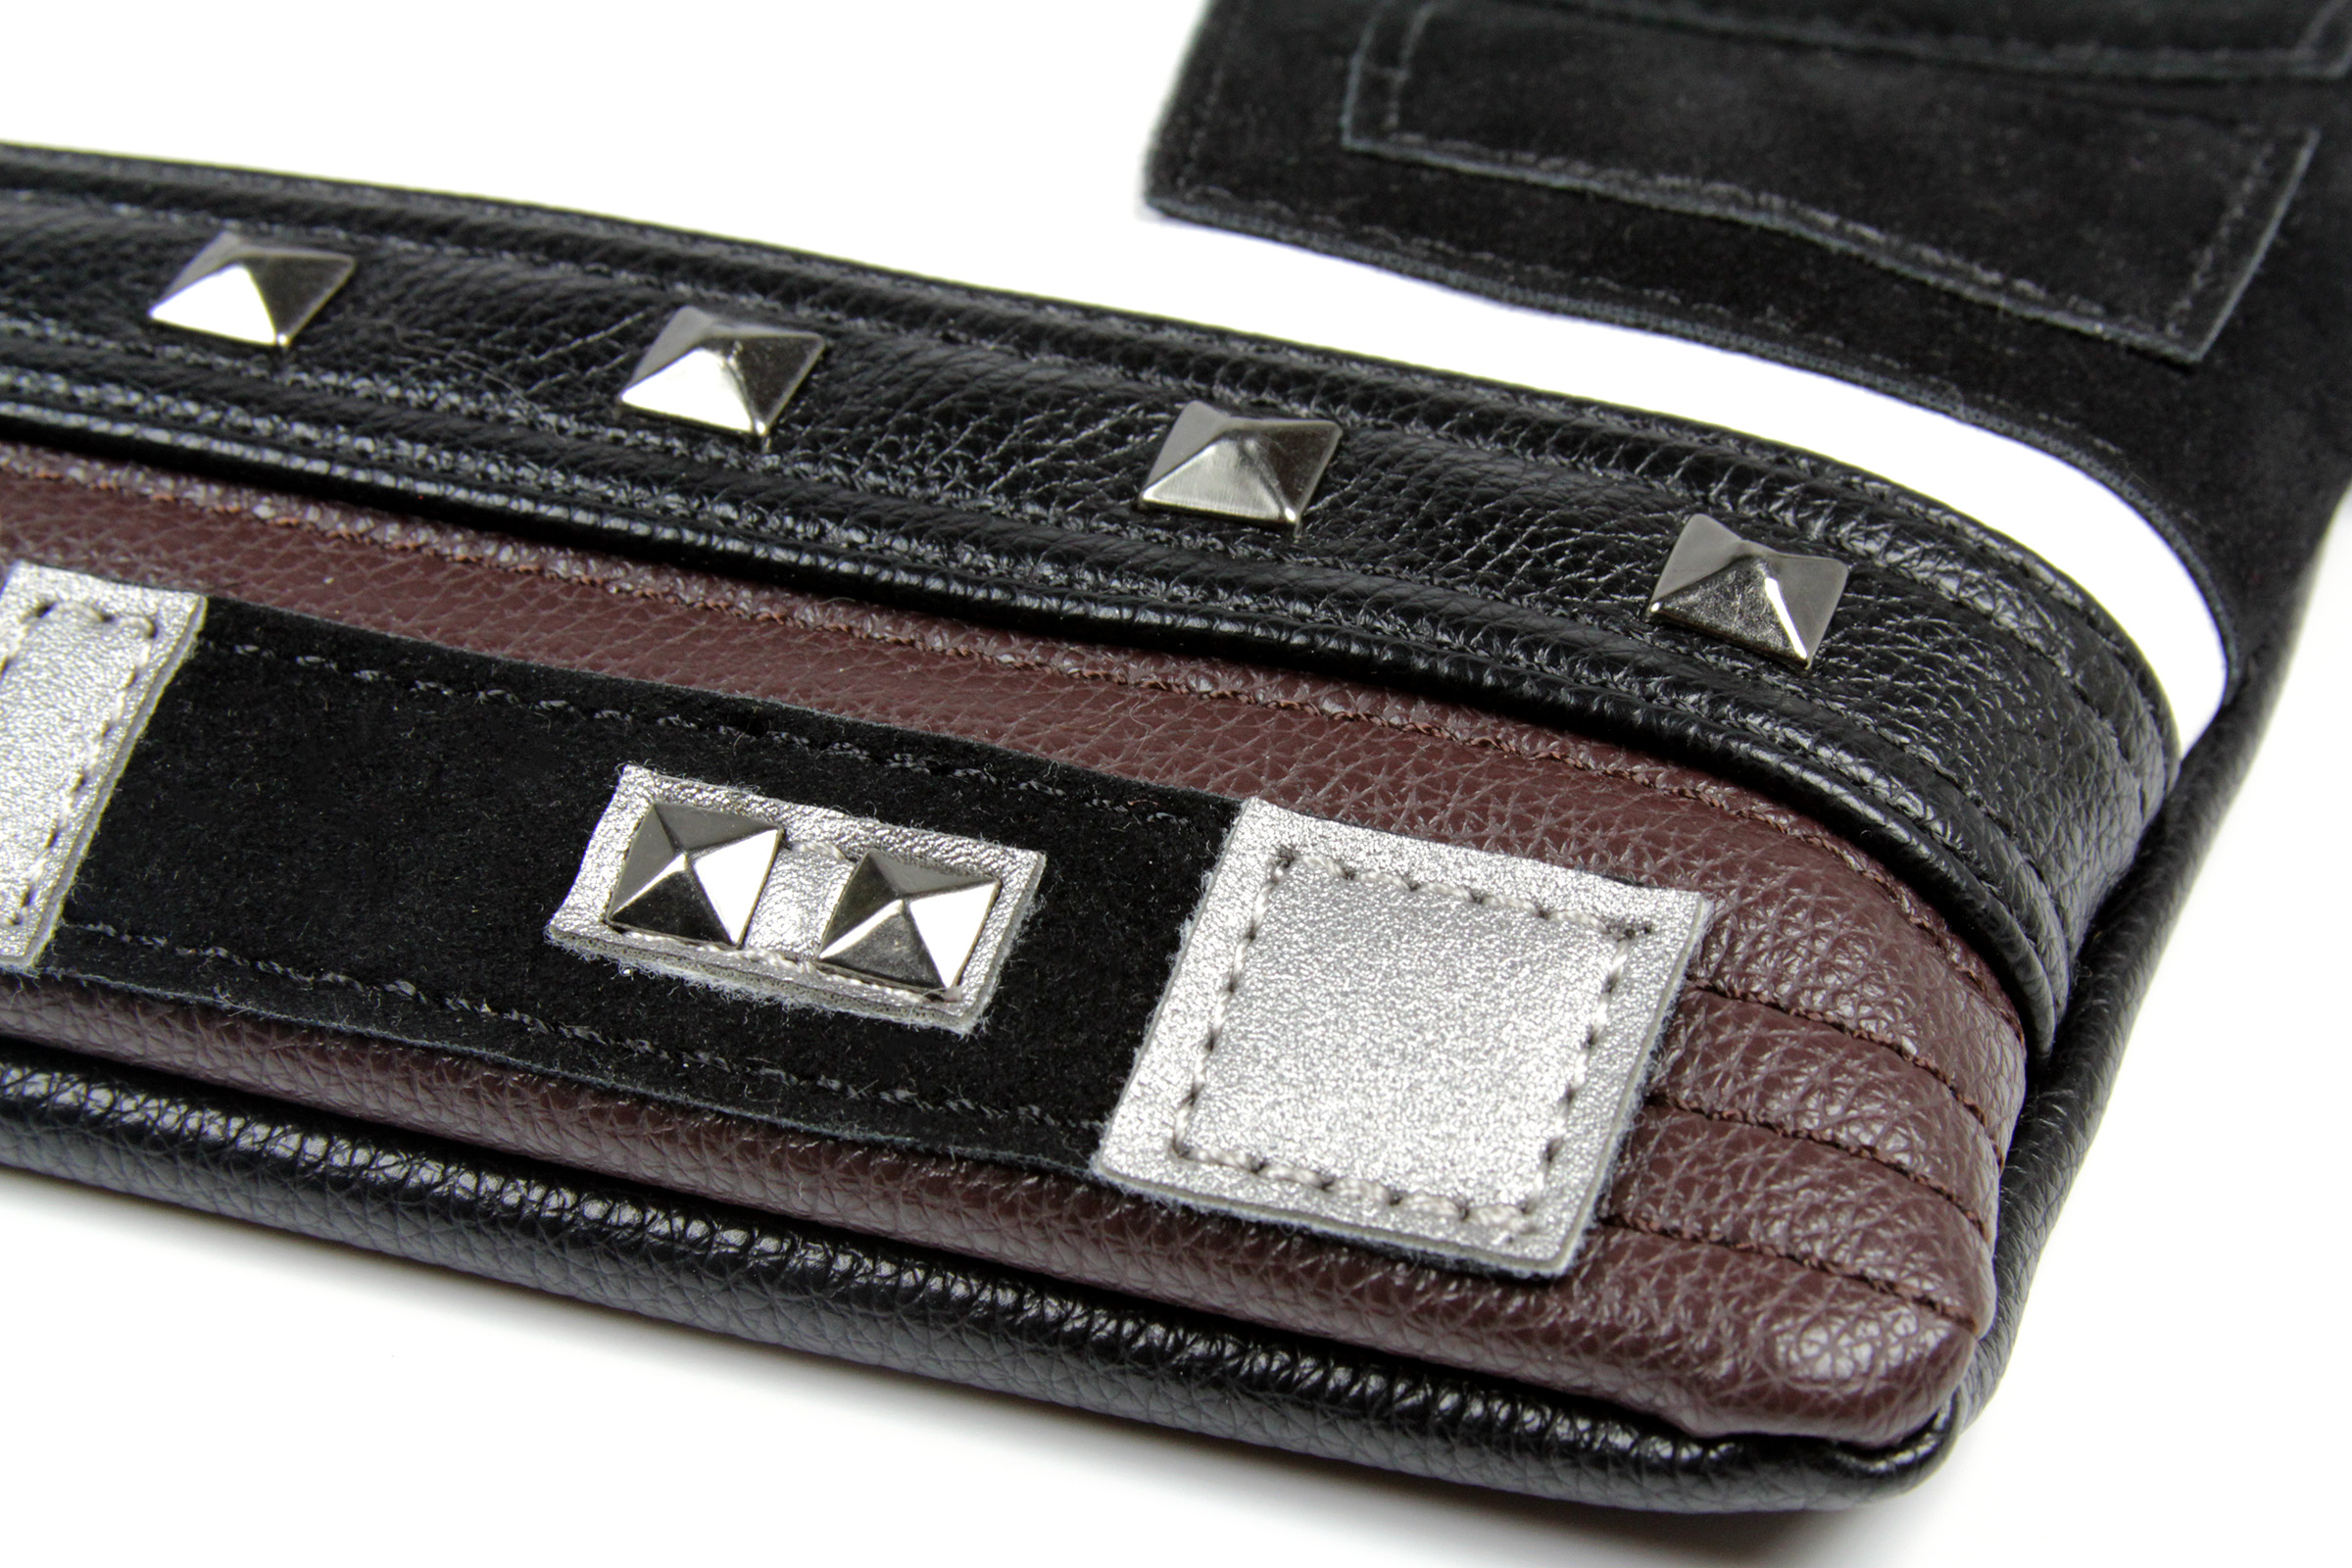 Sent From Mars - Star Wars Han Solo Inspired Millennium Purse